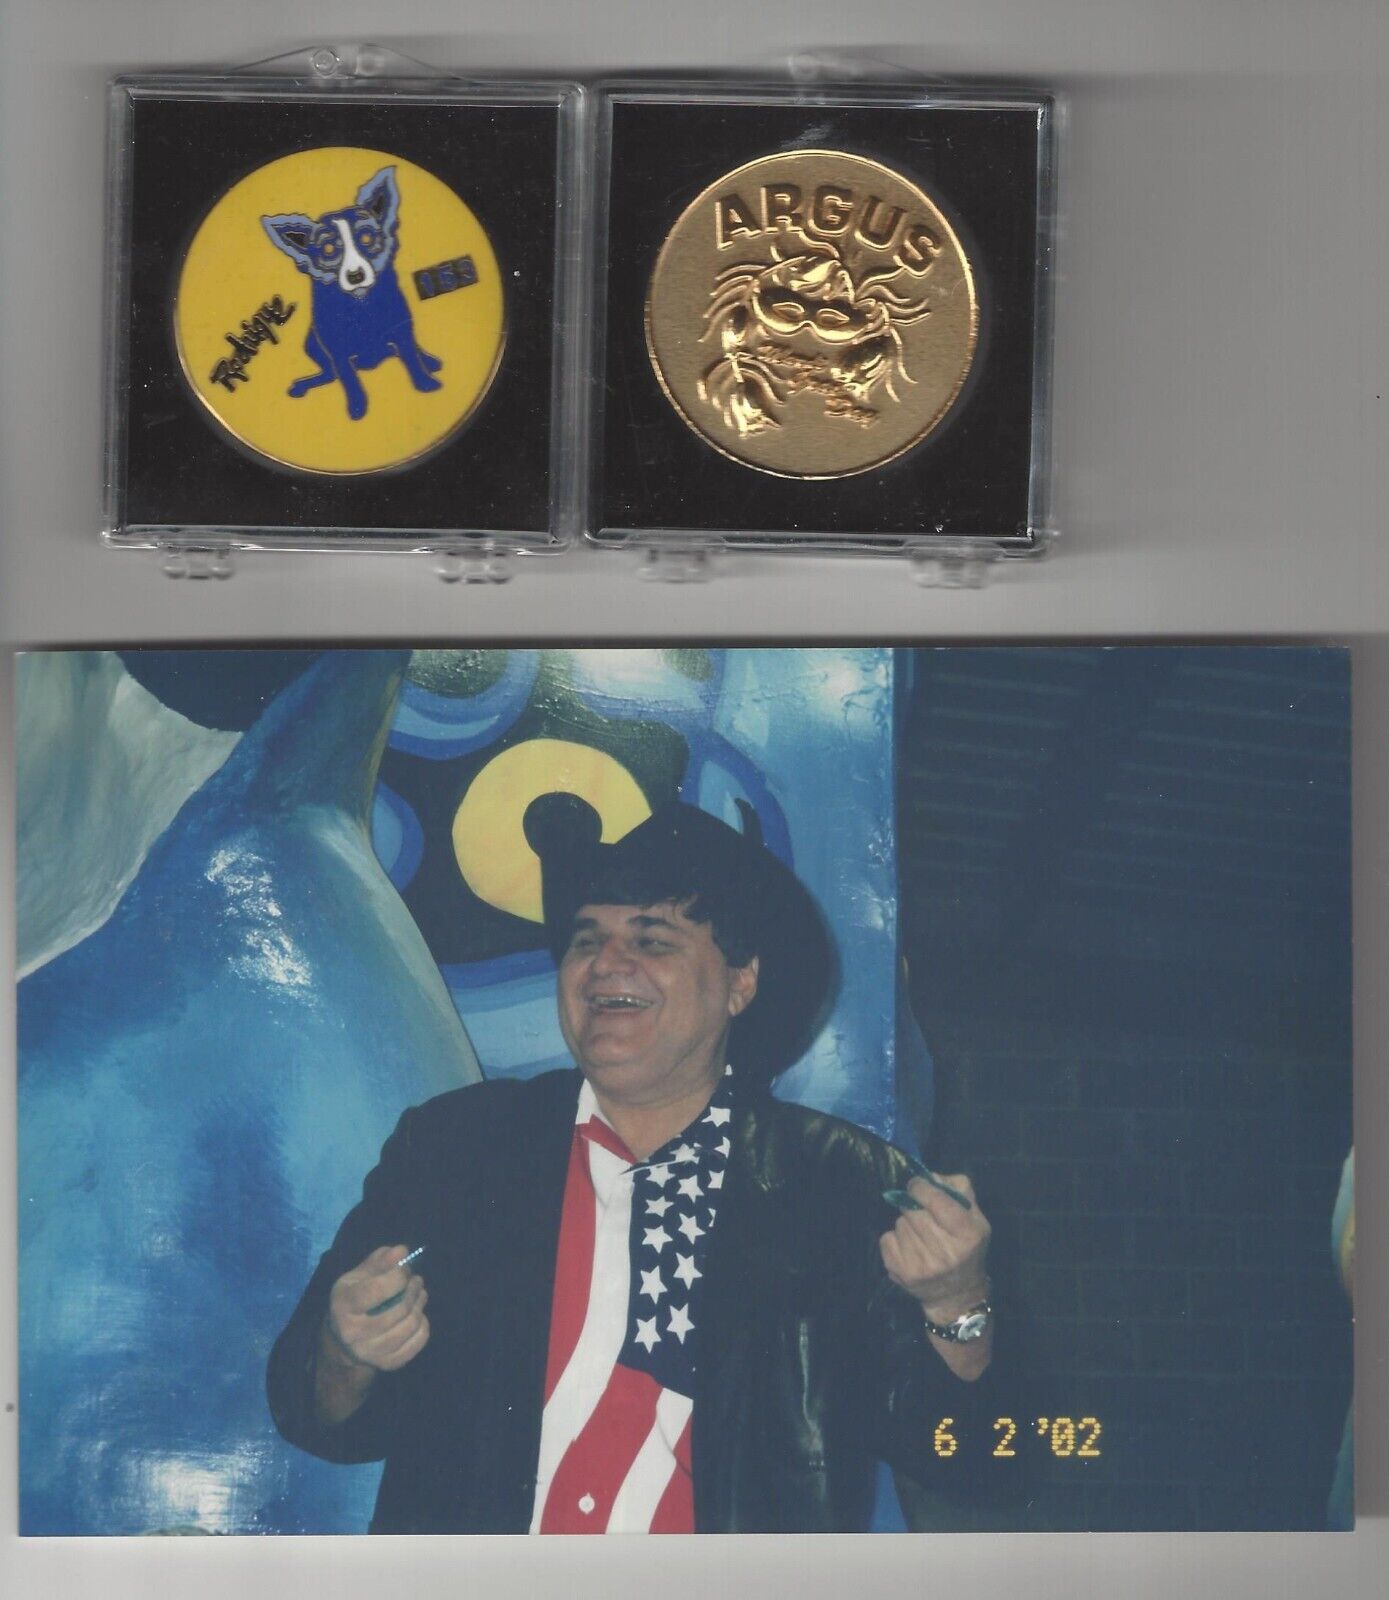 KREWE OF ARGUS RARE GEORGE RODRIQUE BLUE DOG MULTI COLOR YELLOW 2002 DOUBLOON 